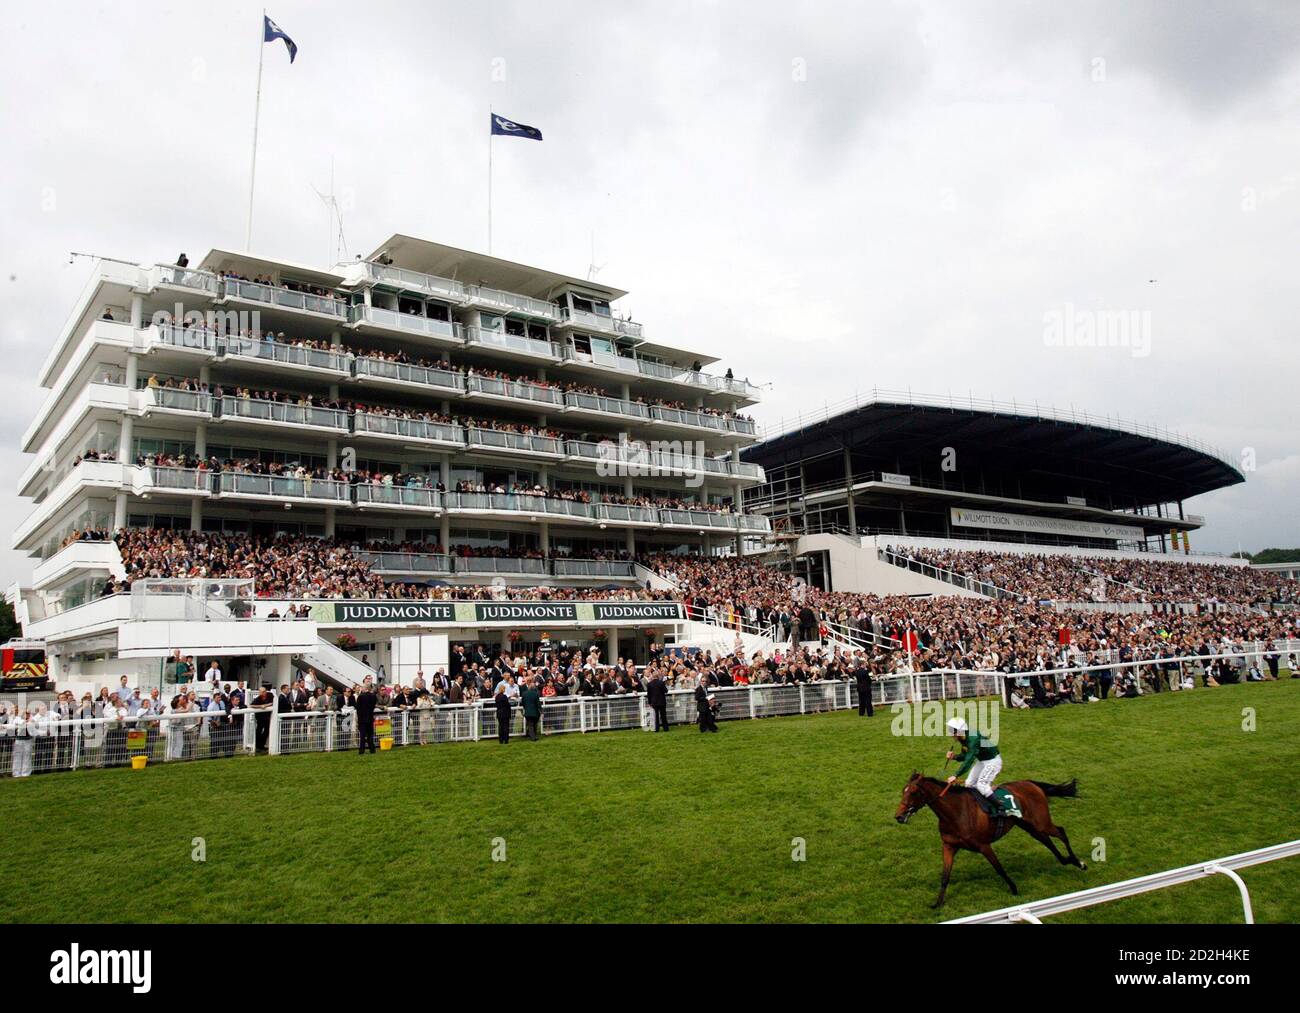 Seb Sanders on his mount Look Here wins the Oak during the Epsom Derby Festival at Epsom Downs in Surrey, southern England June 6, 2008.    REUTERS/Darren Staples   (BRITAIN) Stock Photo